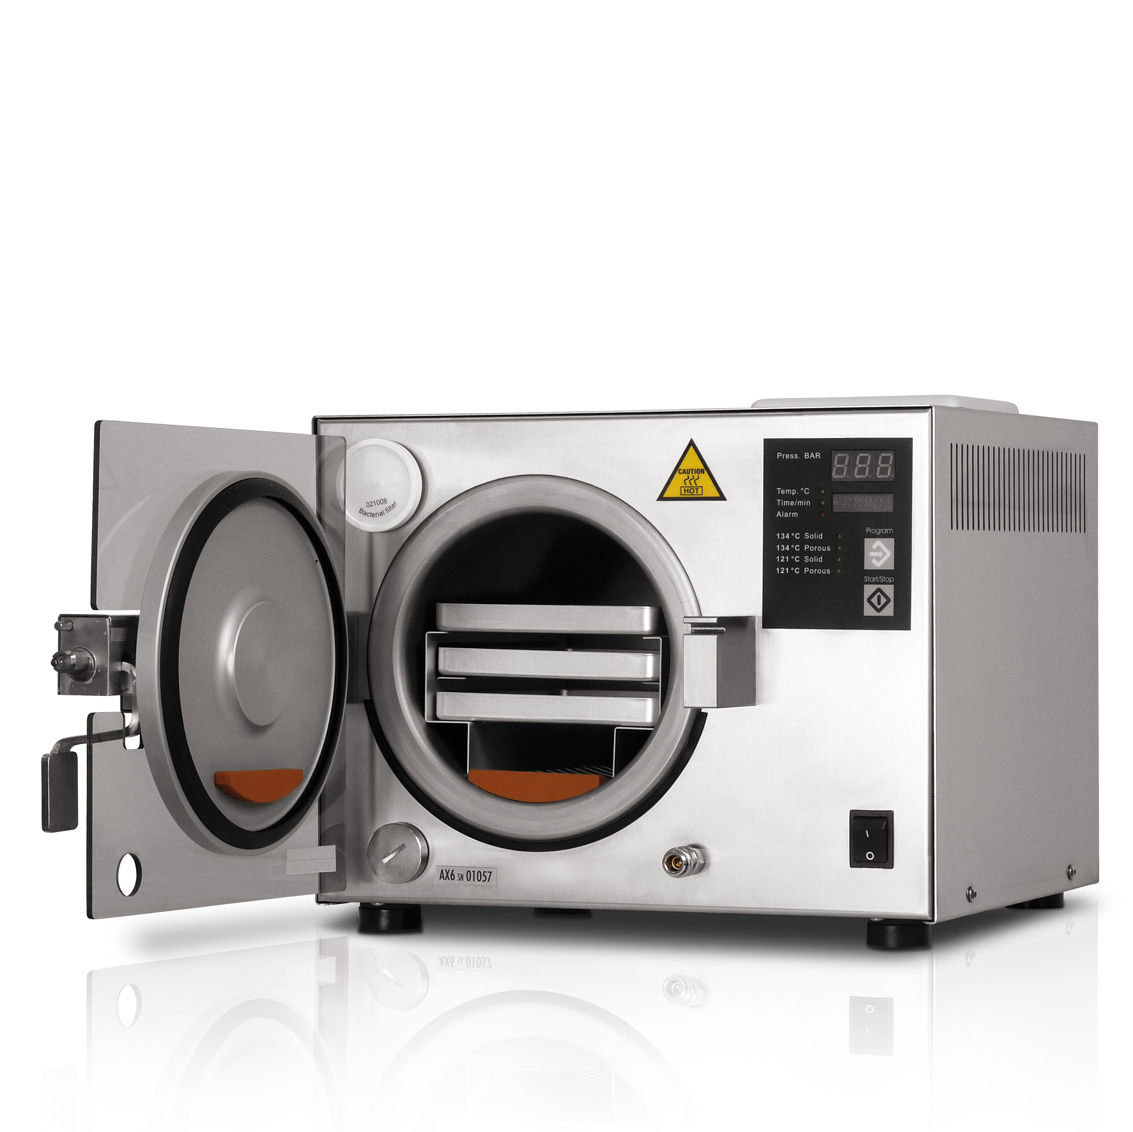 Autoclave class s axyia - 6 liters